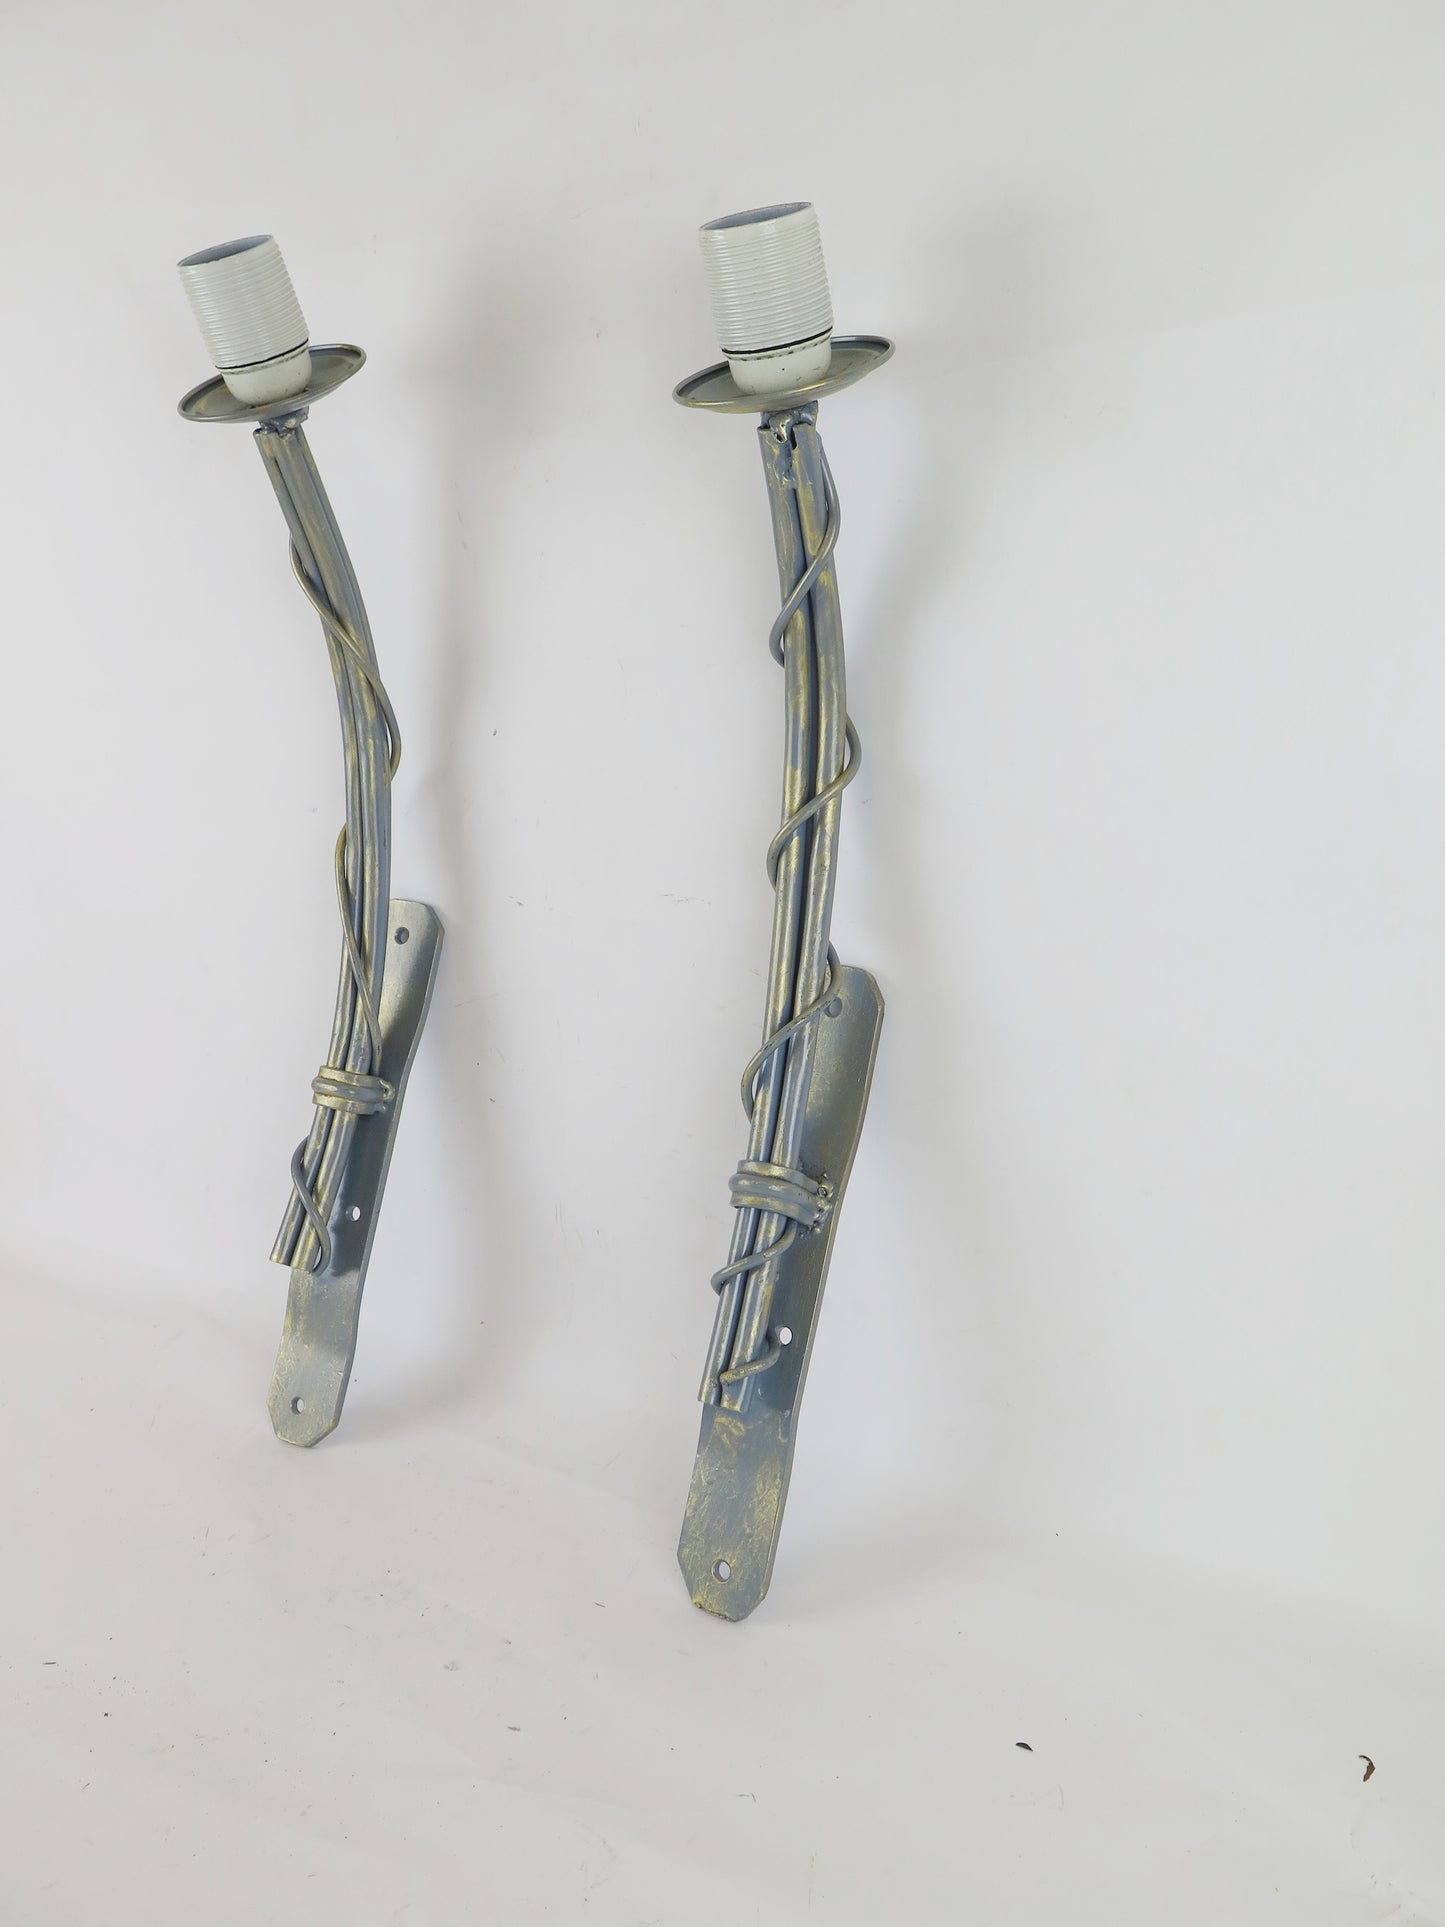 PAIR OF WALL LIGHTS IN ARTISTIC WROUGHT IRON HANDMADE WALL LIGHT CH4